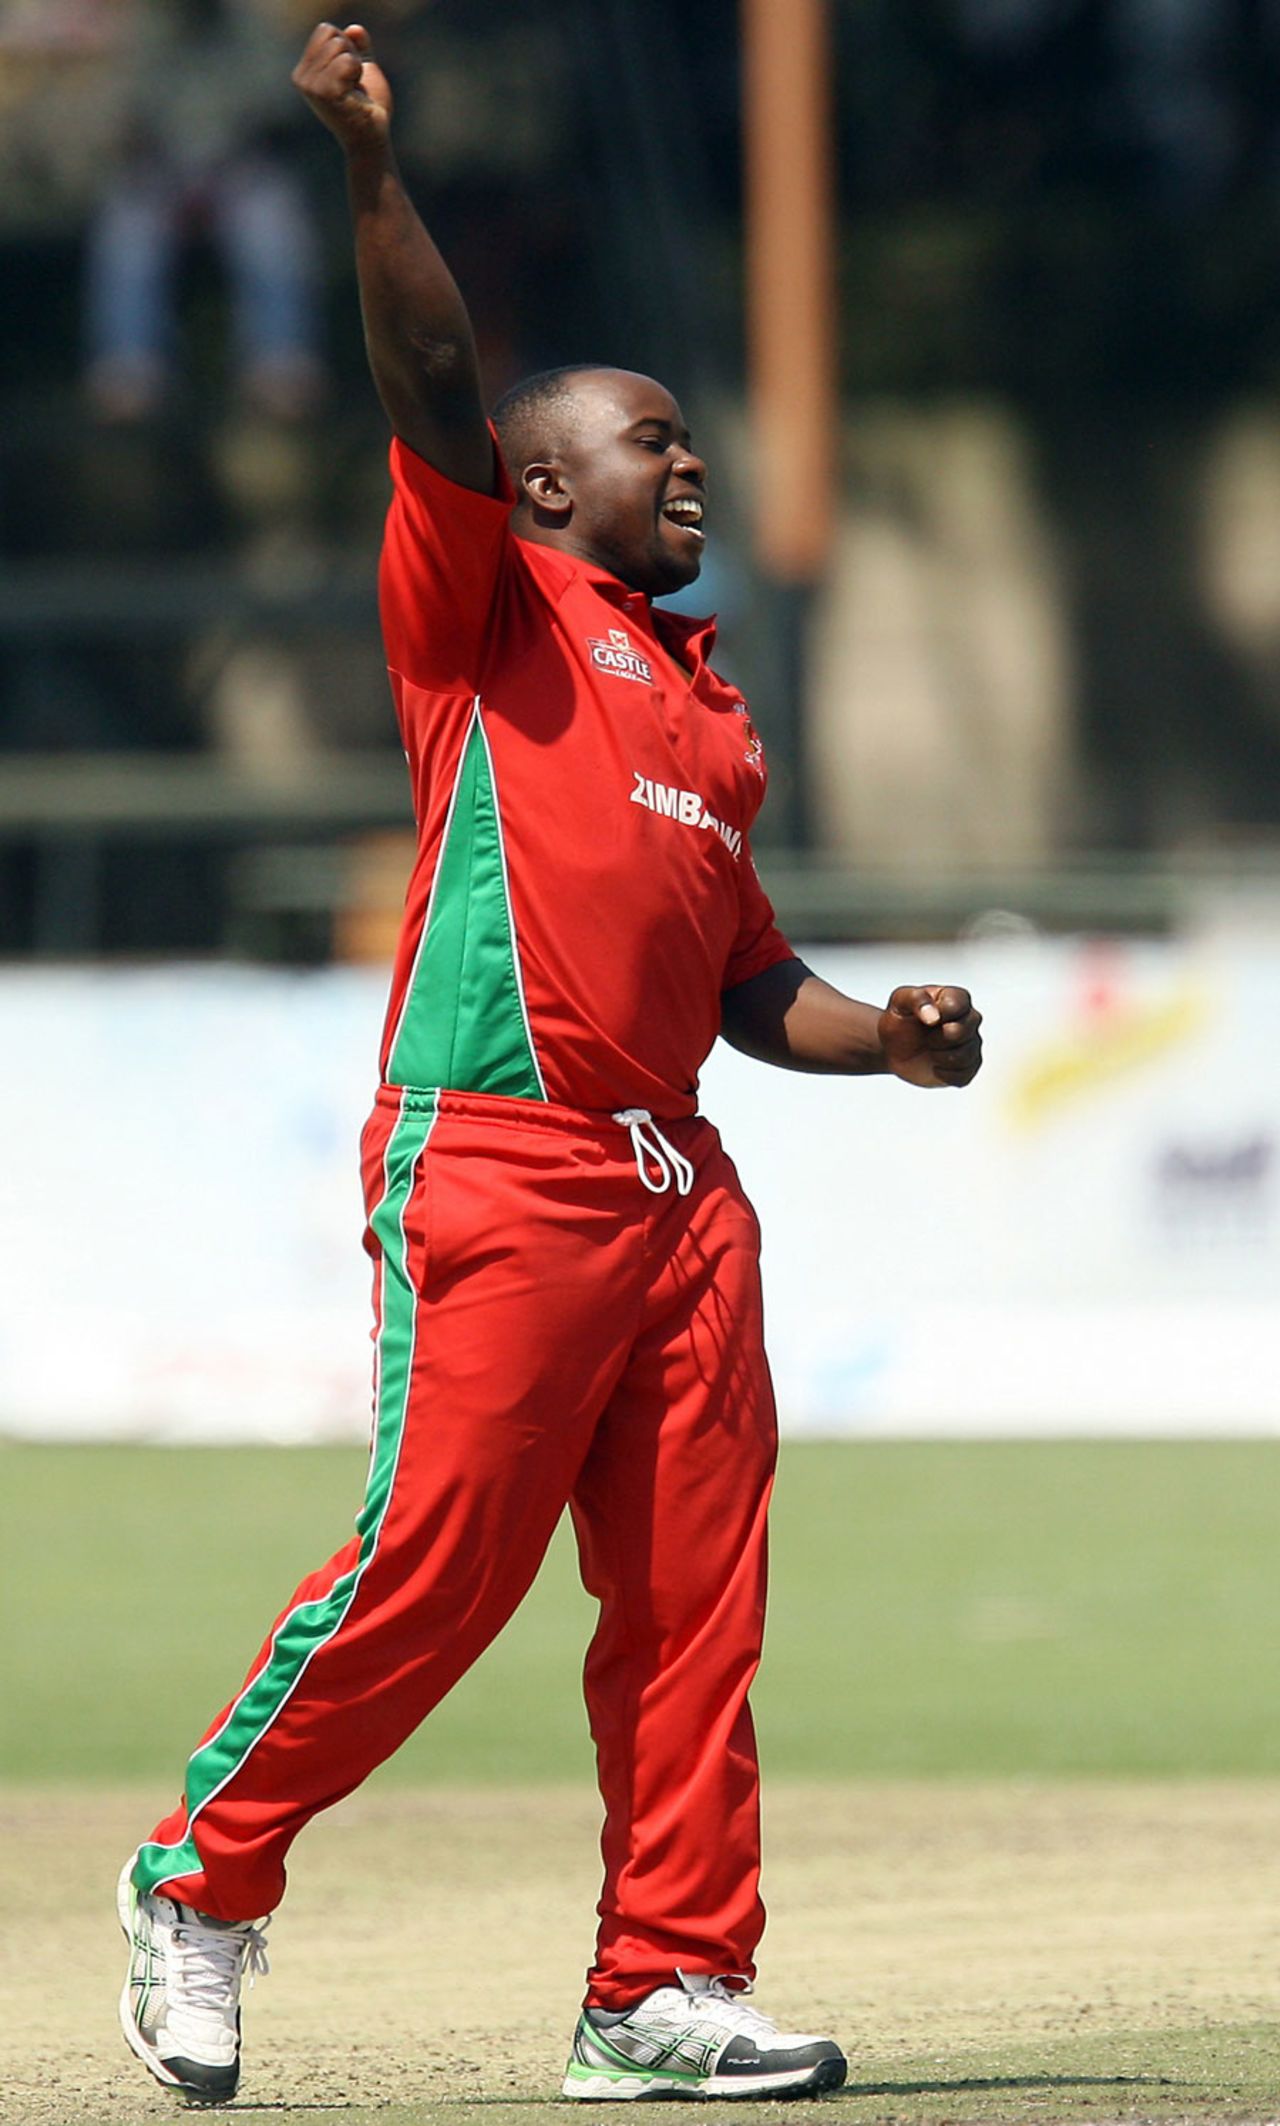 Prosper Utseya became the second Zimbabwe player to claim a hat-trick, Zimbabwe v South Africa, tri-series, Harare, August 29, 2014